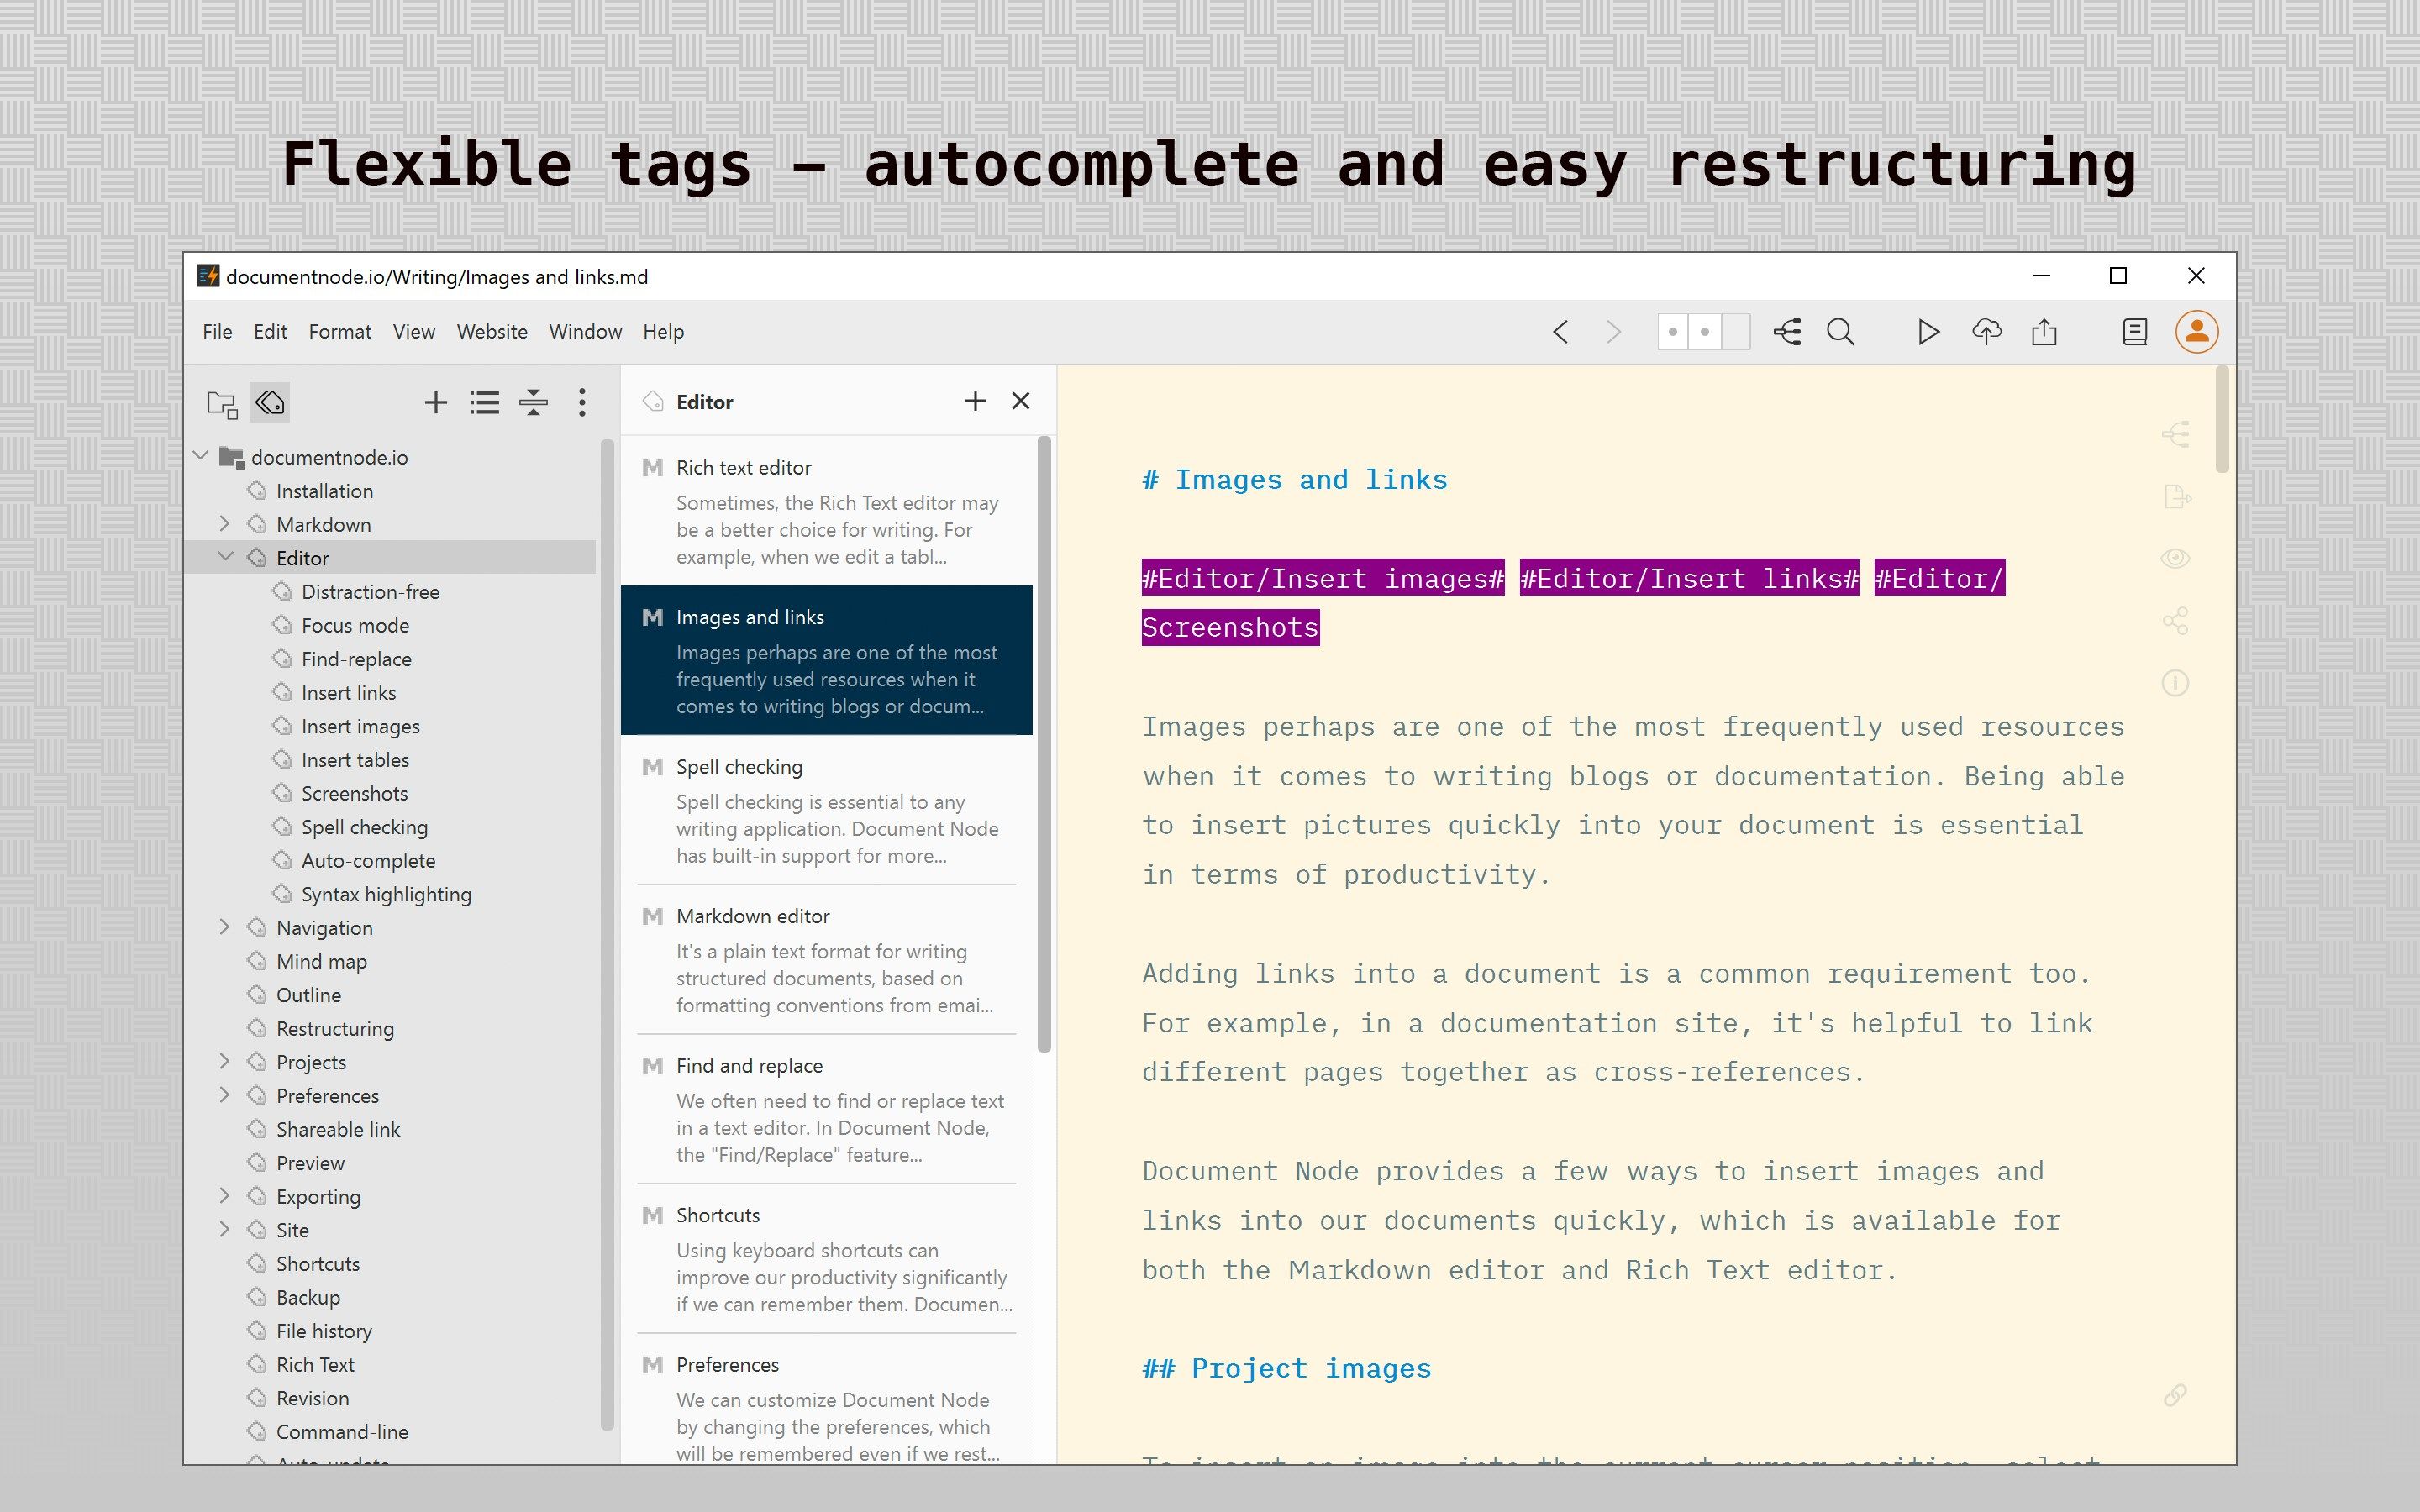 Flexible tags - autocomplete and easy restructuring